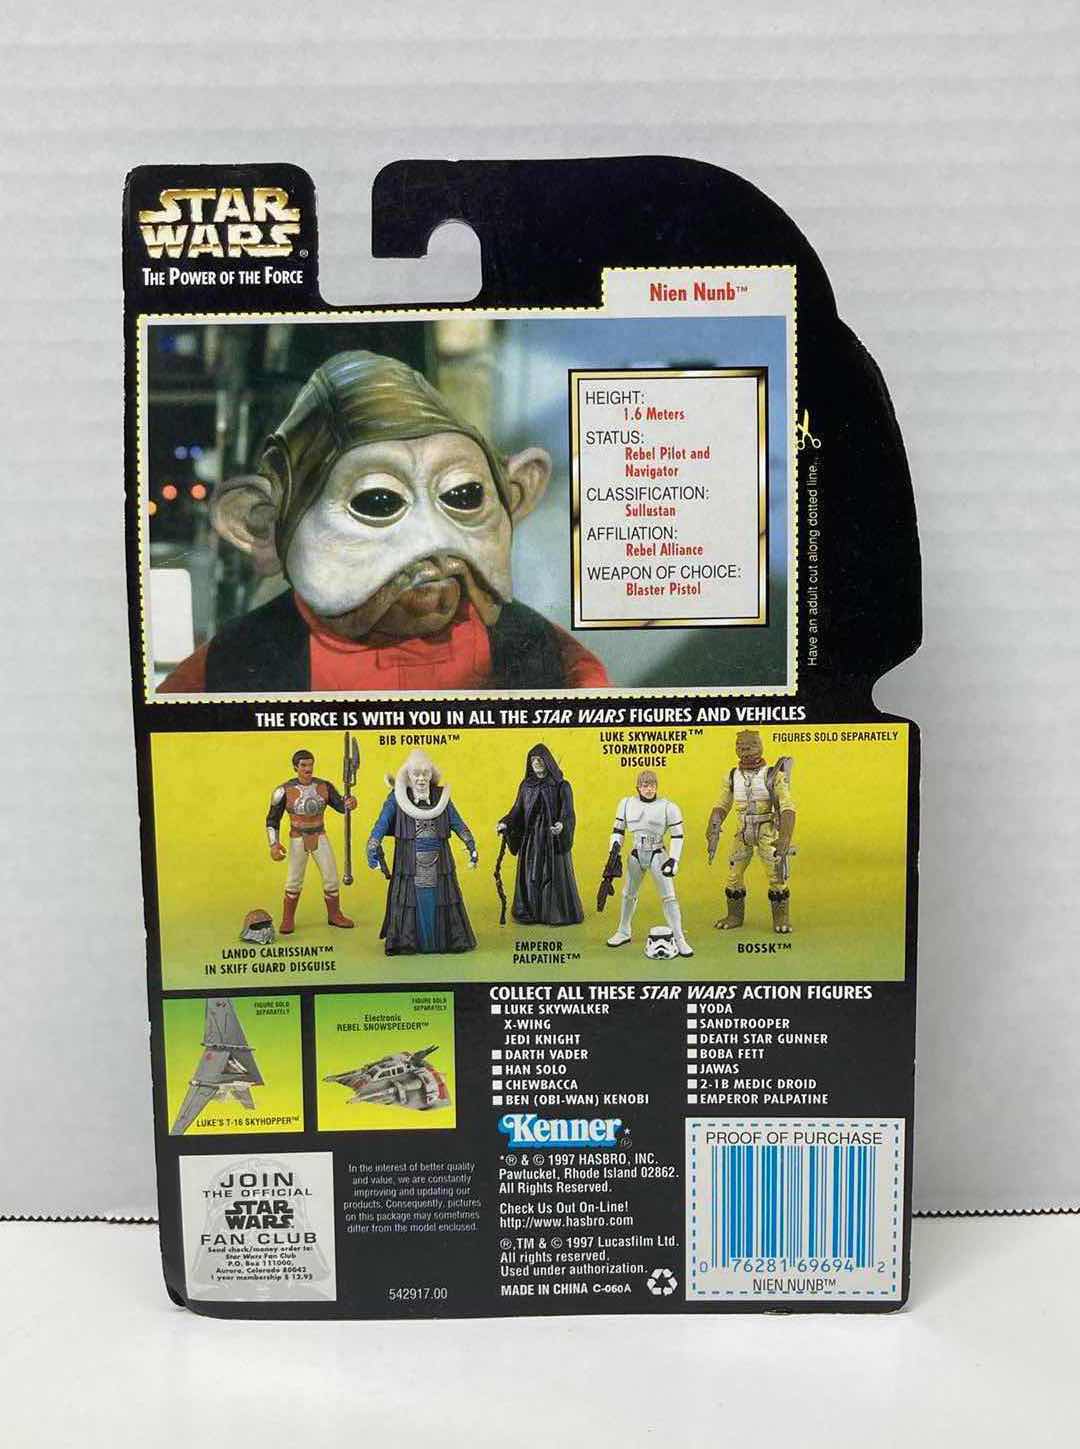 Photo 2 of NEW STAR WARS THE POWER OF THE FORCE ACTION FIGURE, NIEN NUNB W BLASTER PISTOL & BLASTER RIFLE